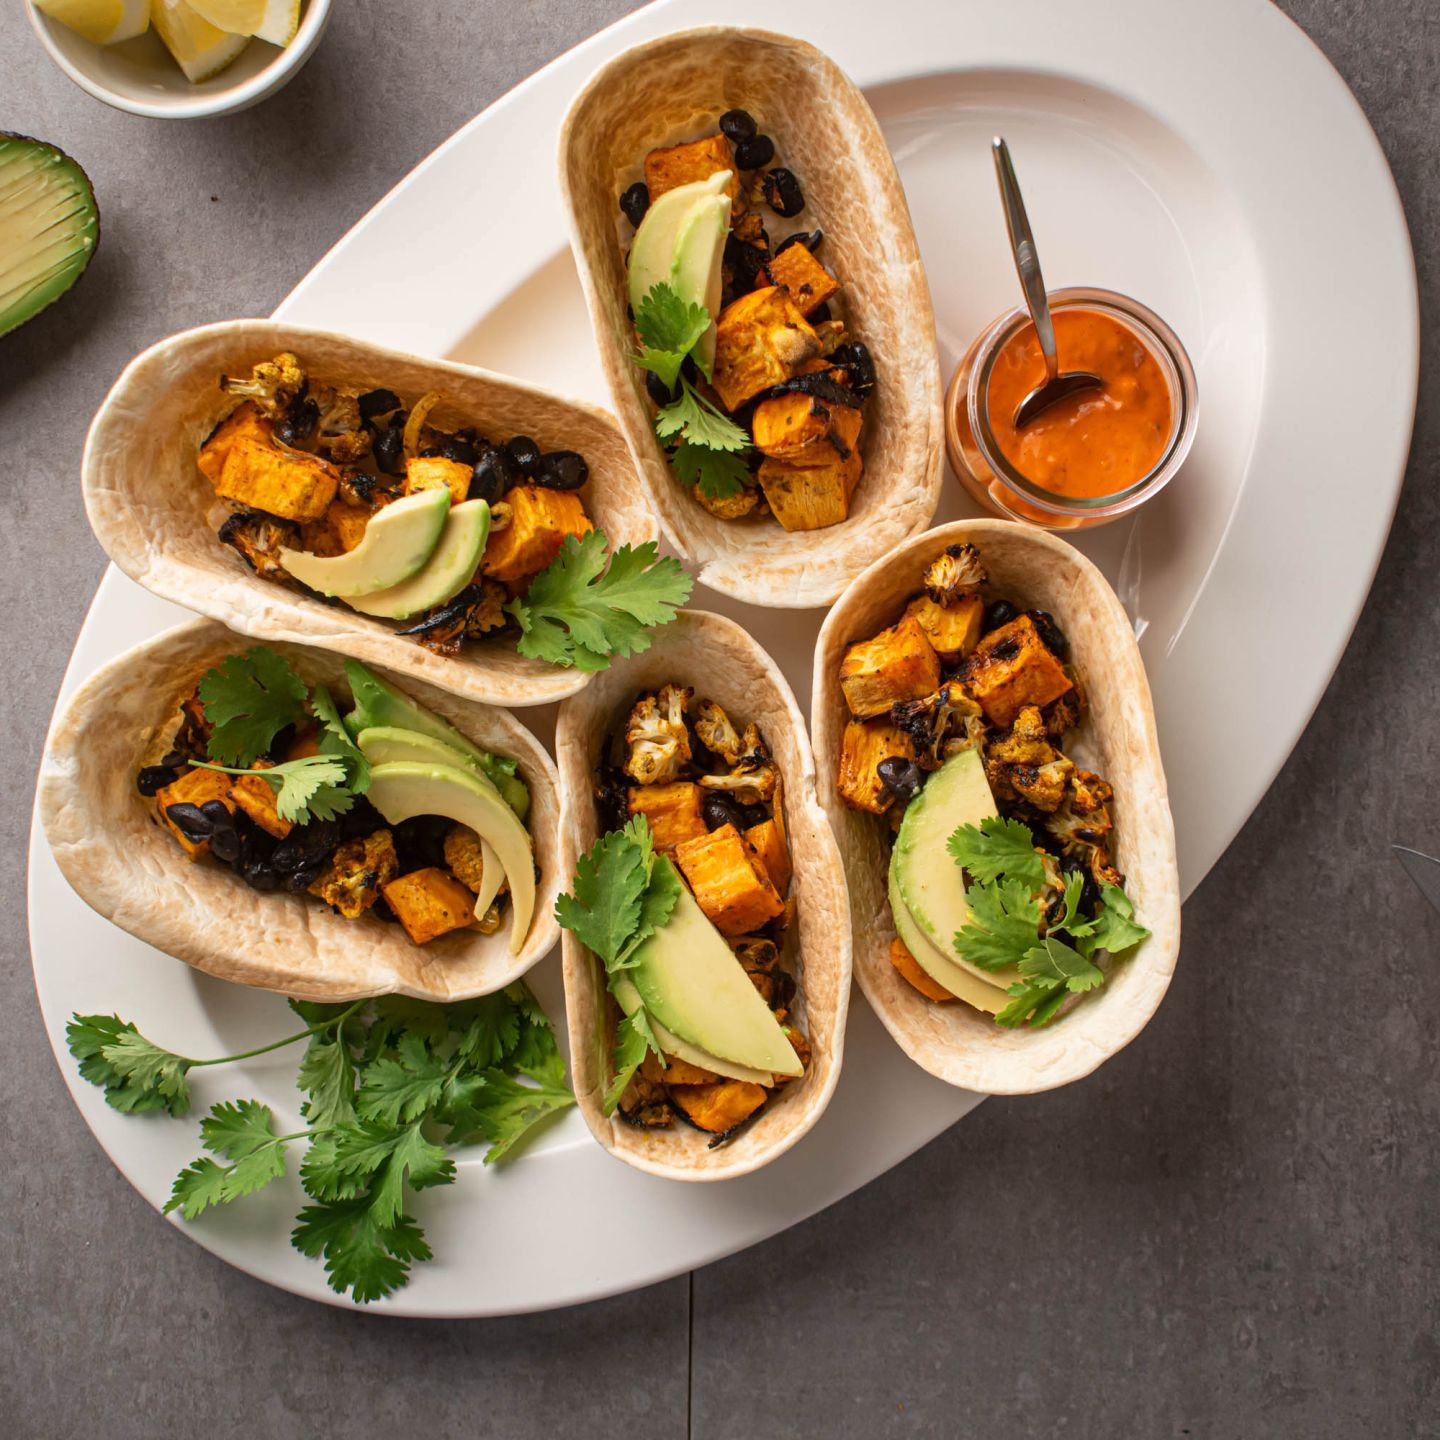 Sweet potato tacos with black beans, cauliflower, avocado, and cilantro served in corn tortillas. 